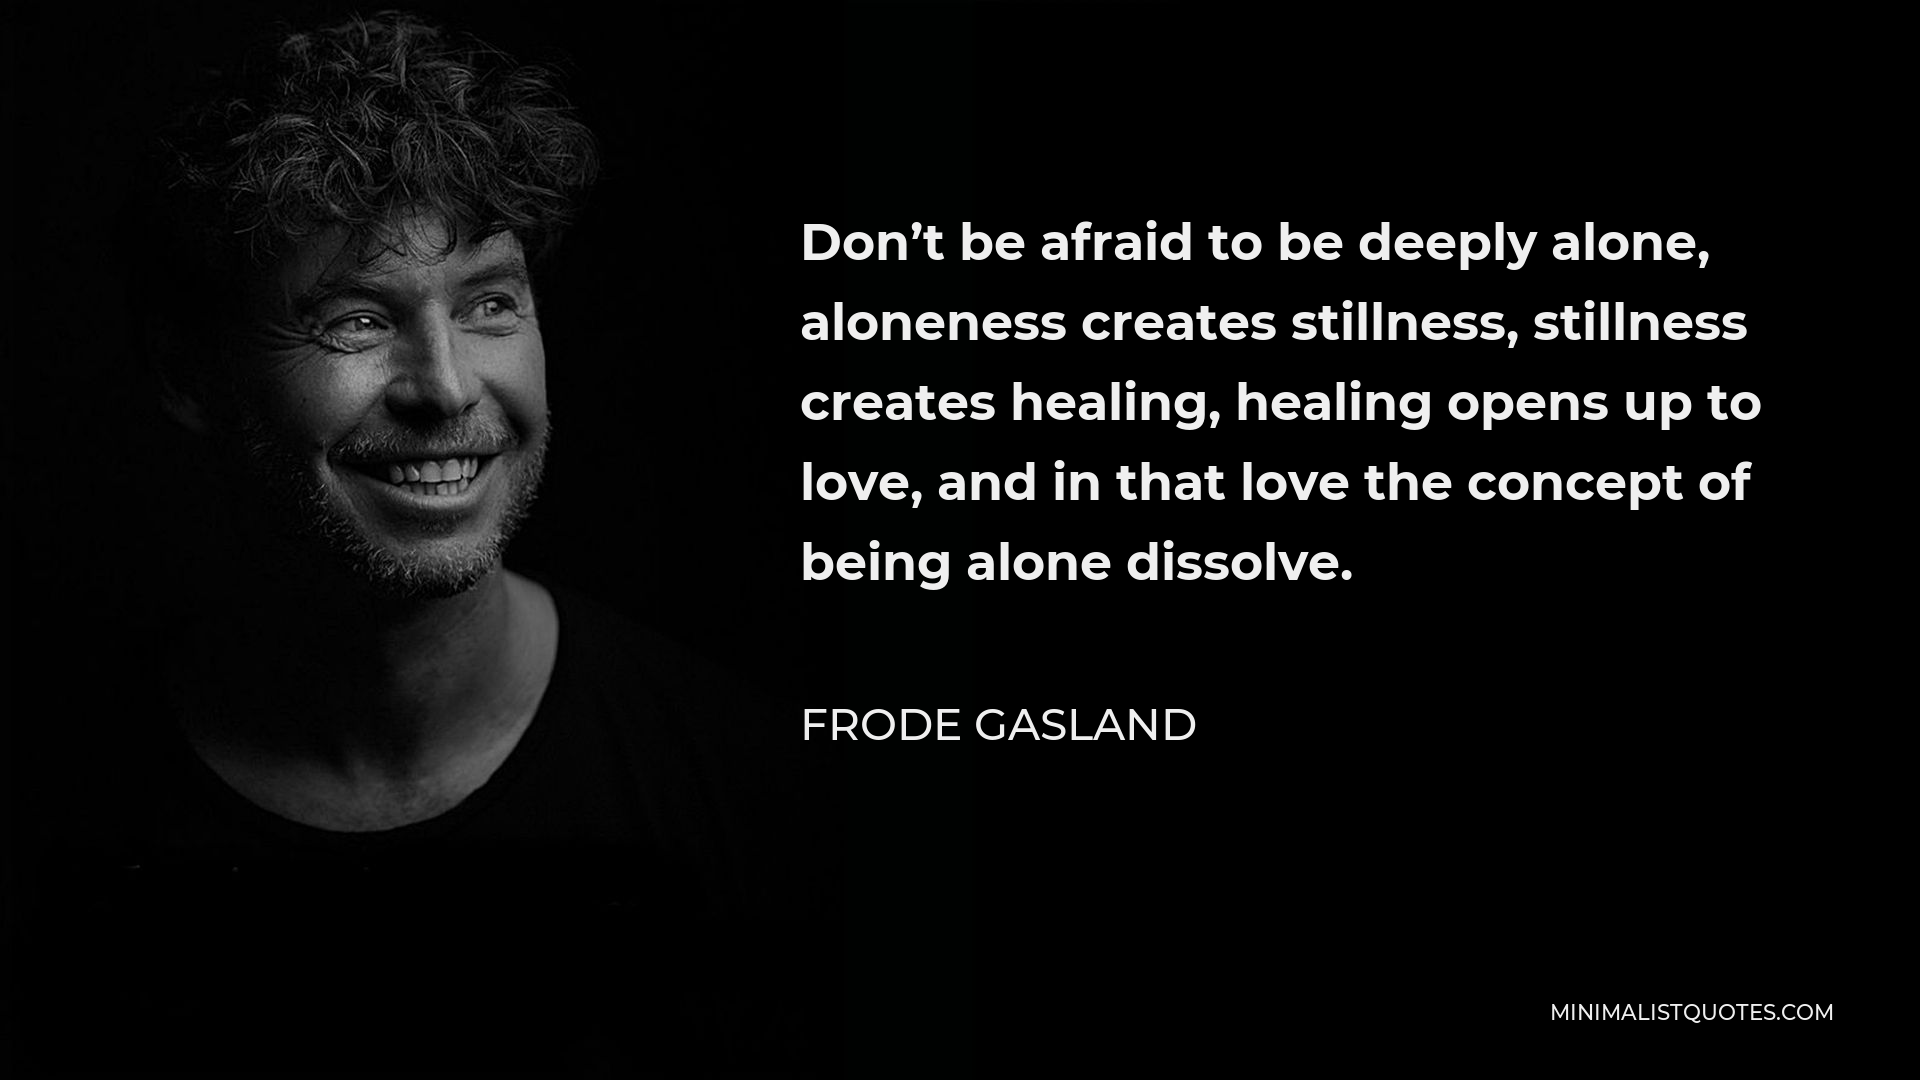 Frode Gasland Quote - Don’t be afraid to be deeply alone, aloneness creates stillness, stillness creates healing, healing opens up to love, and in that love the concept of being alone dissolve.